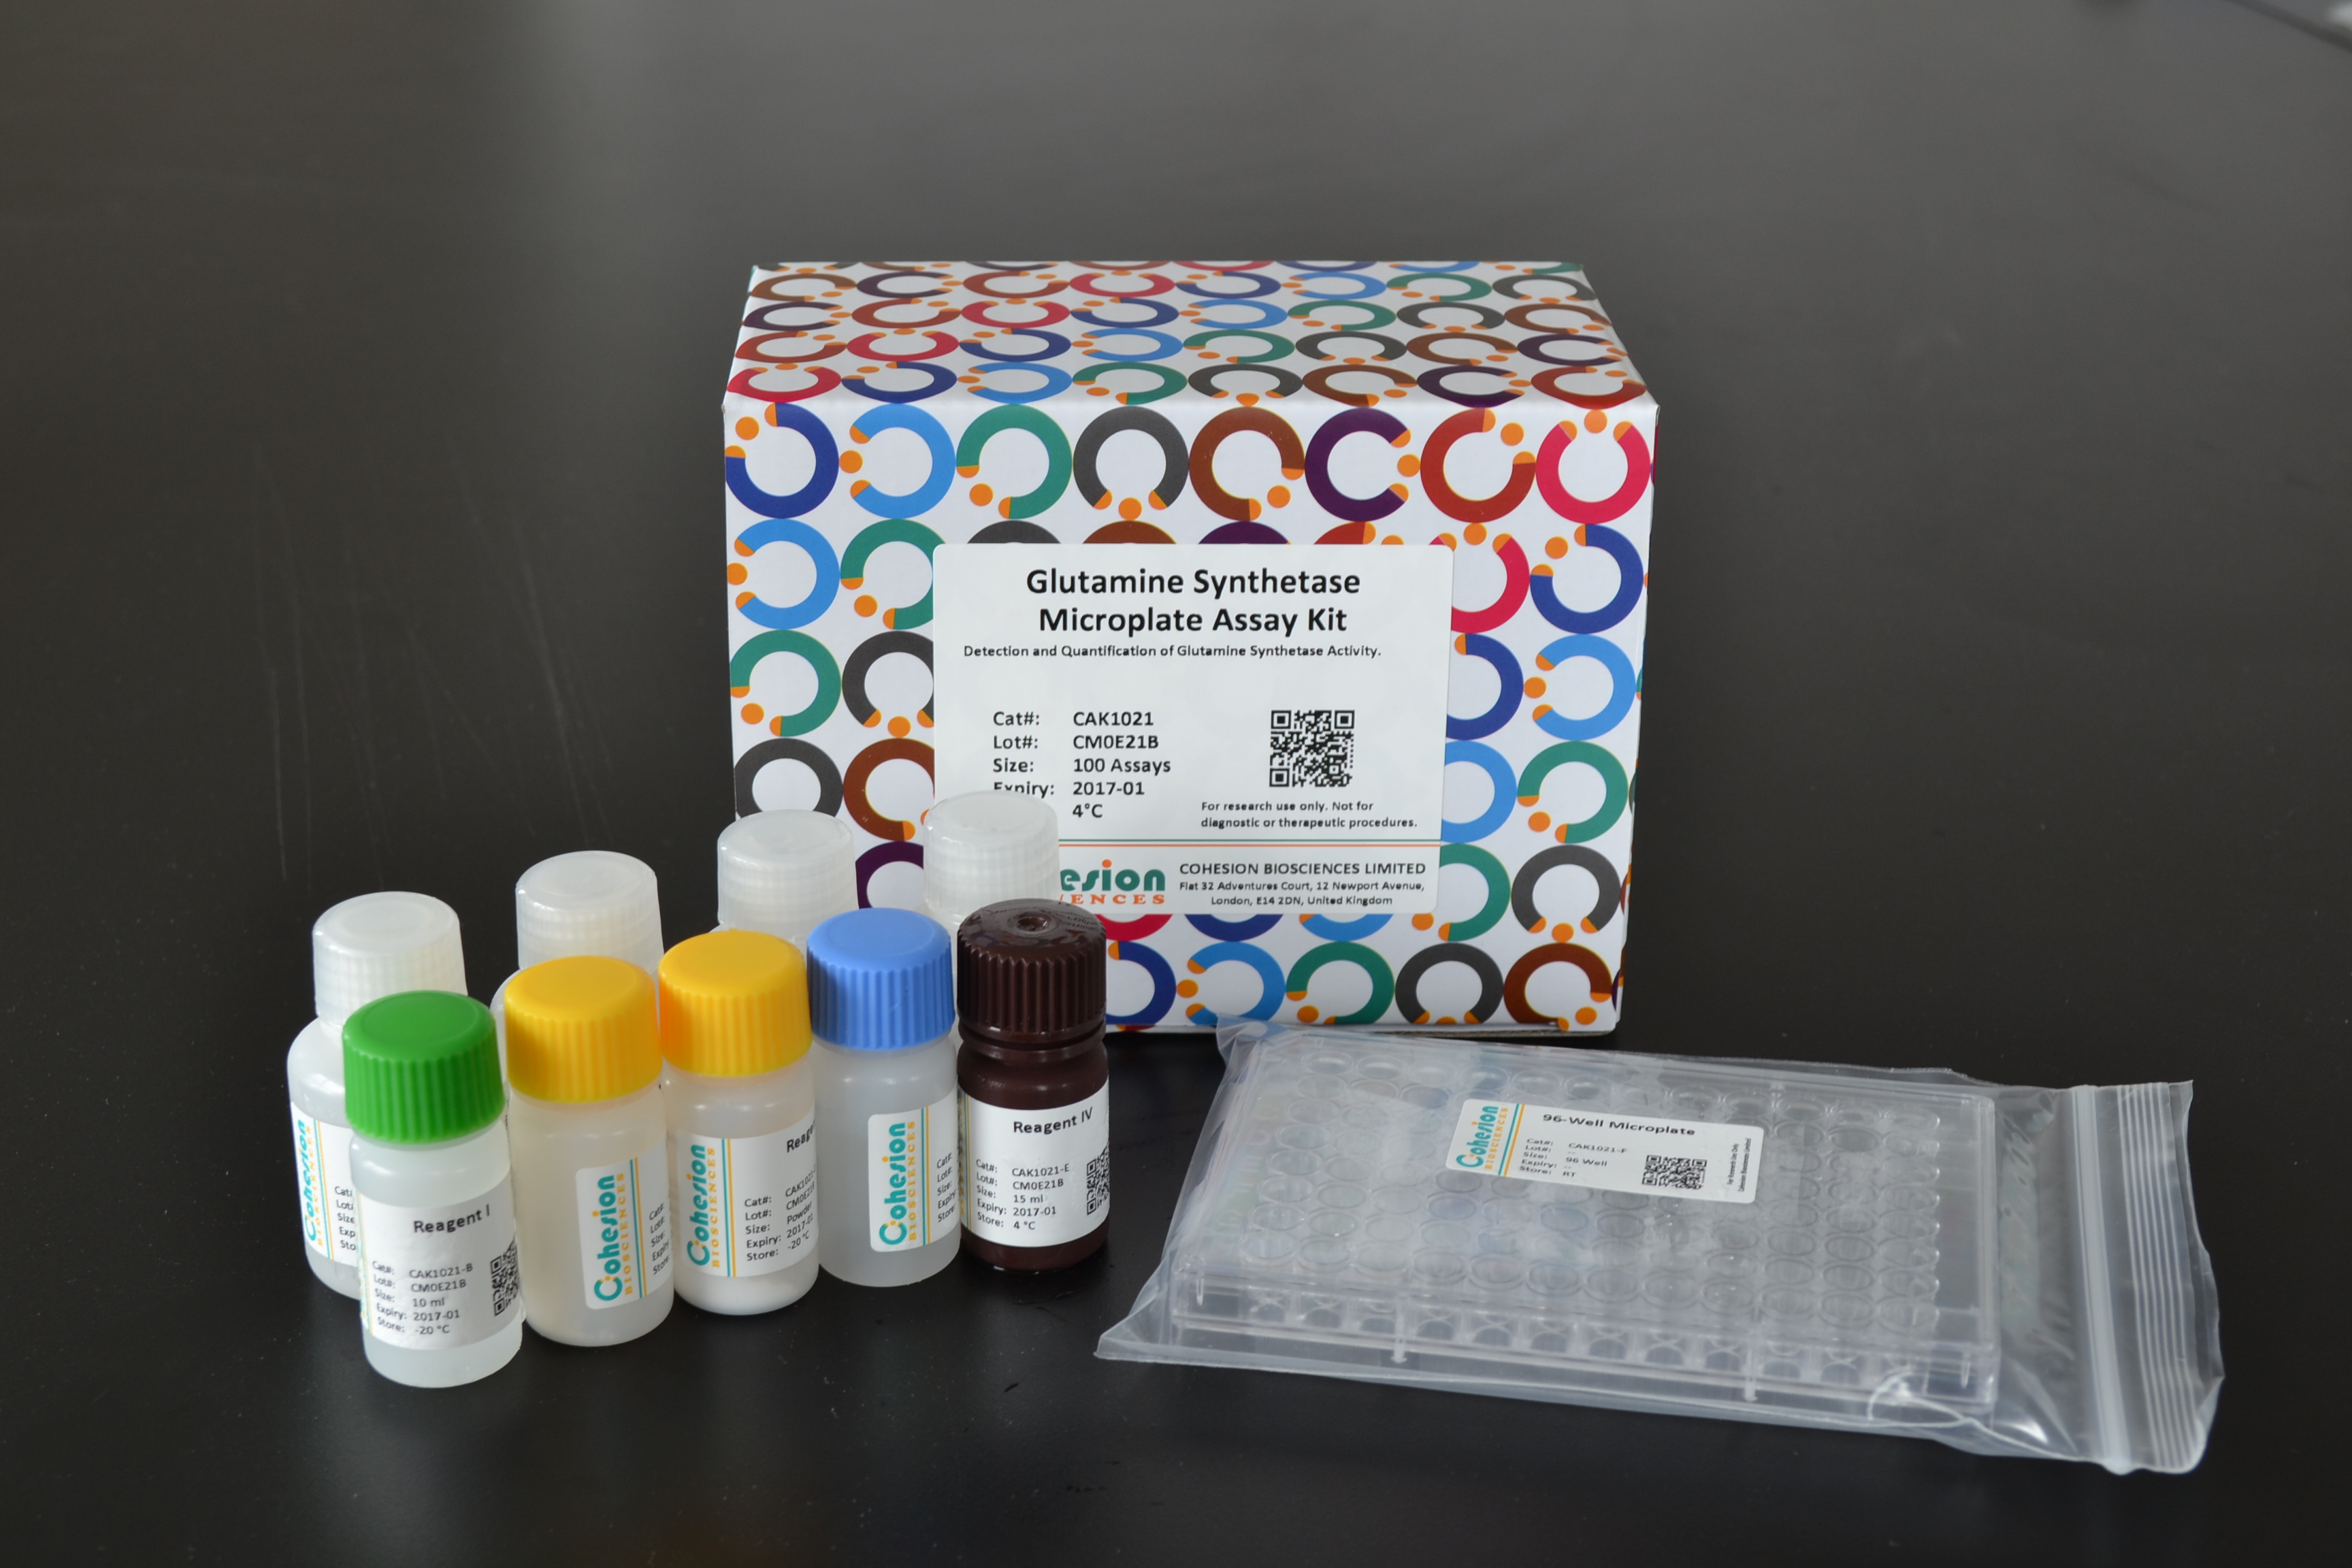 Total Cholesterol Microplate Assay Kit